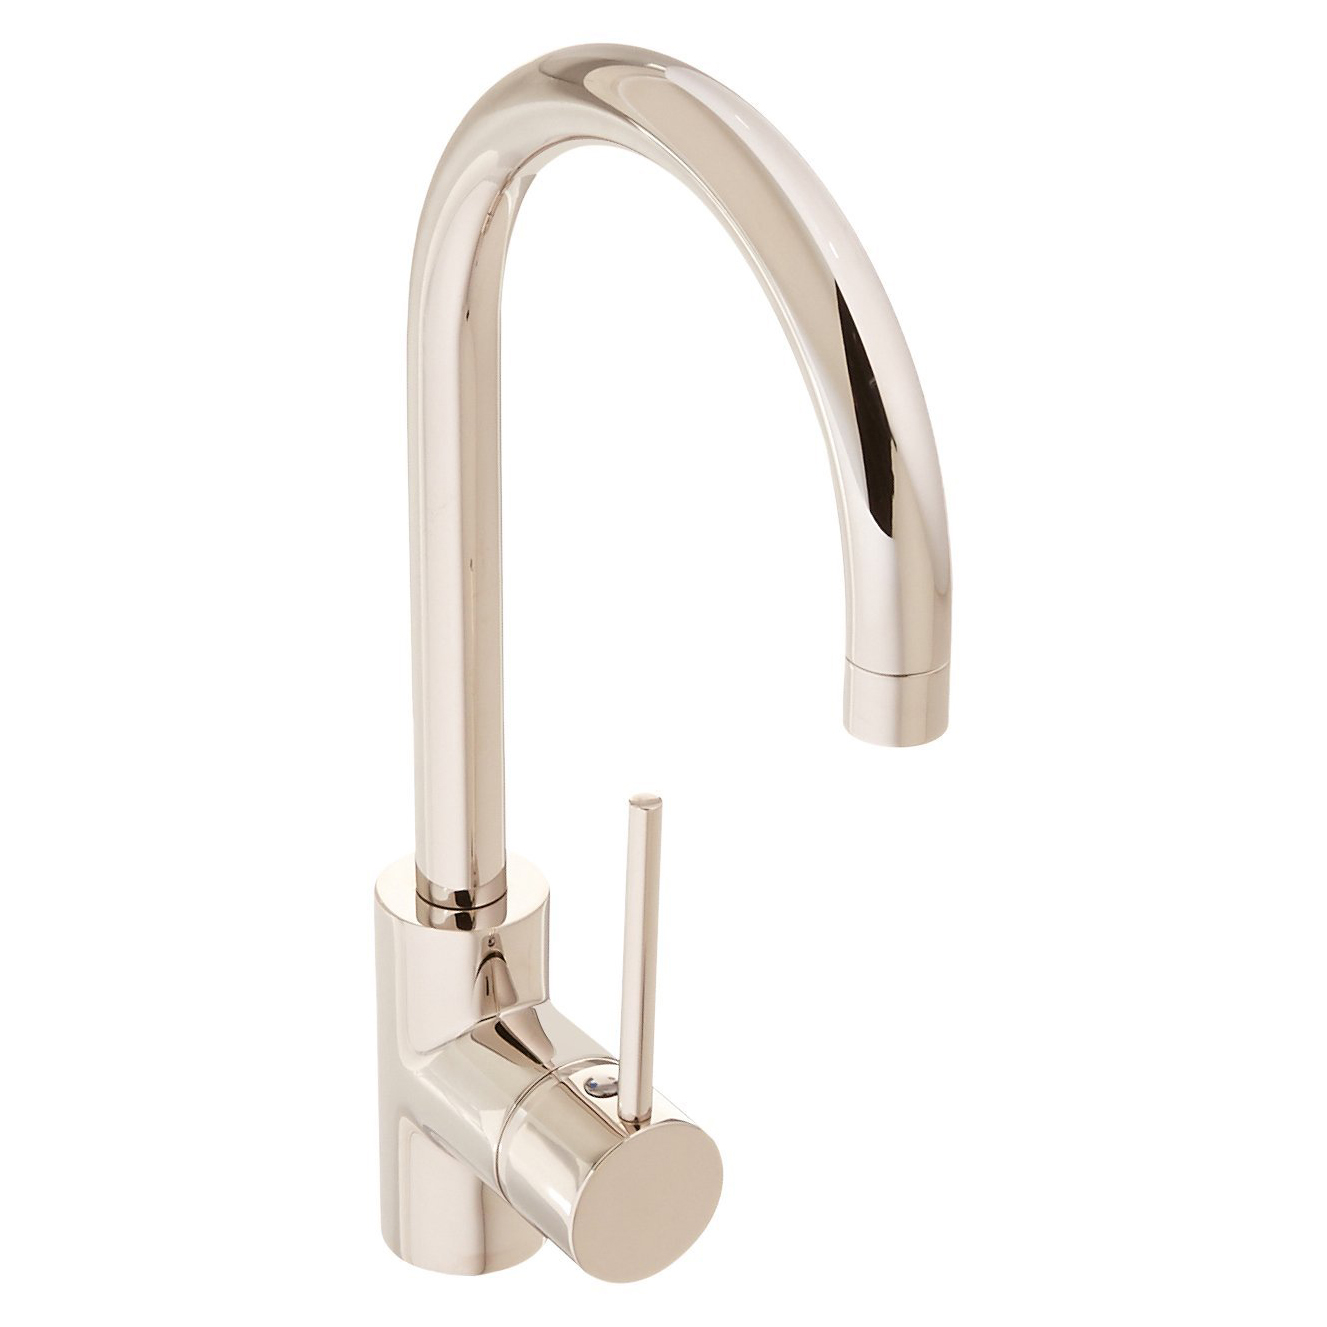 Pirellone Side Lever Bar/Food Prep Faucet in Polished Nickel